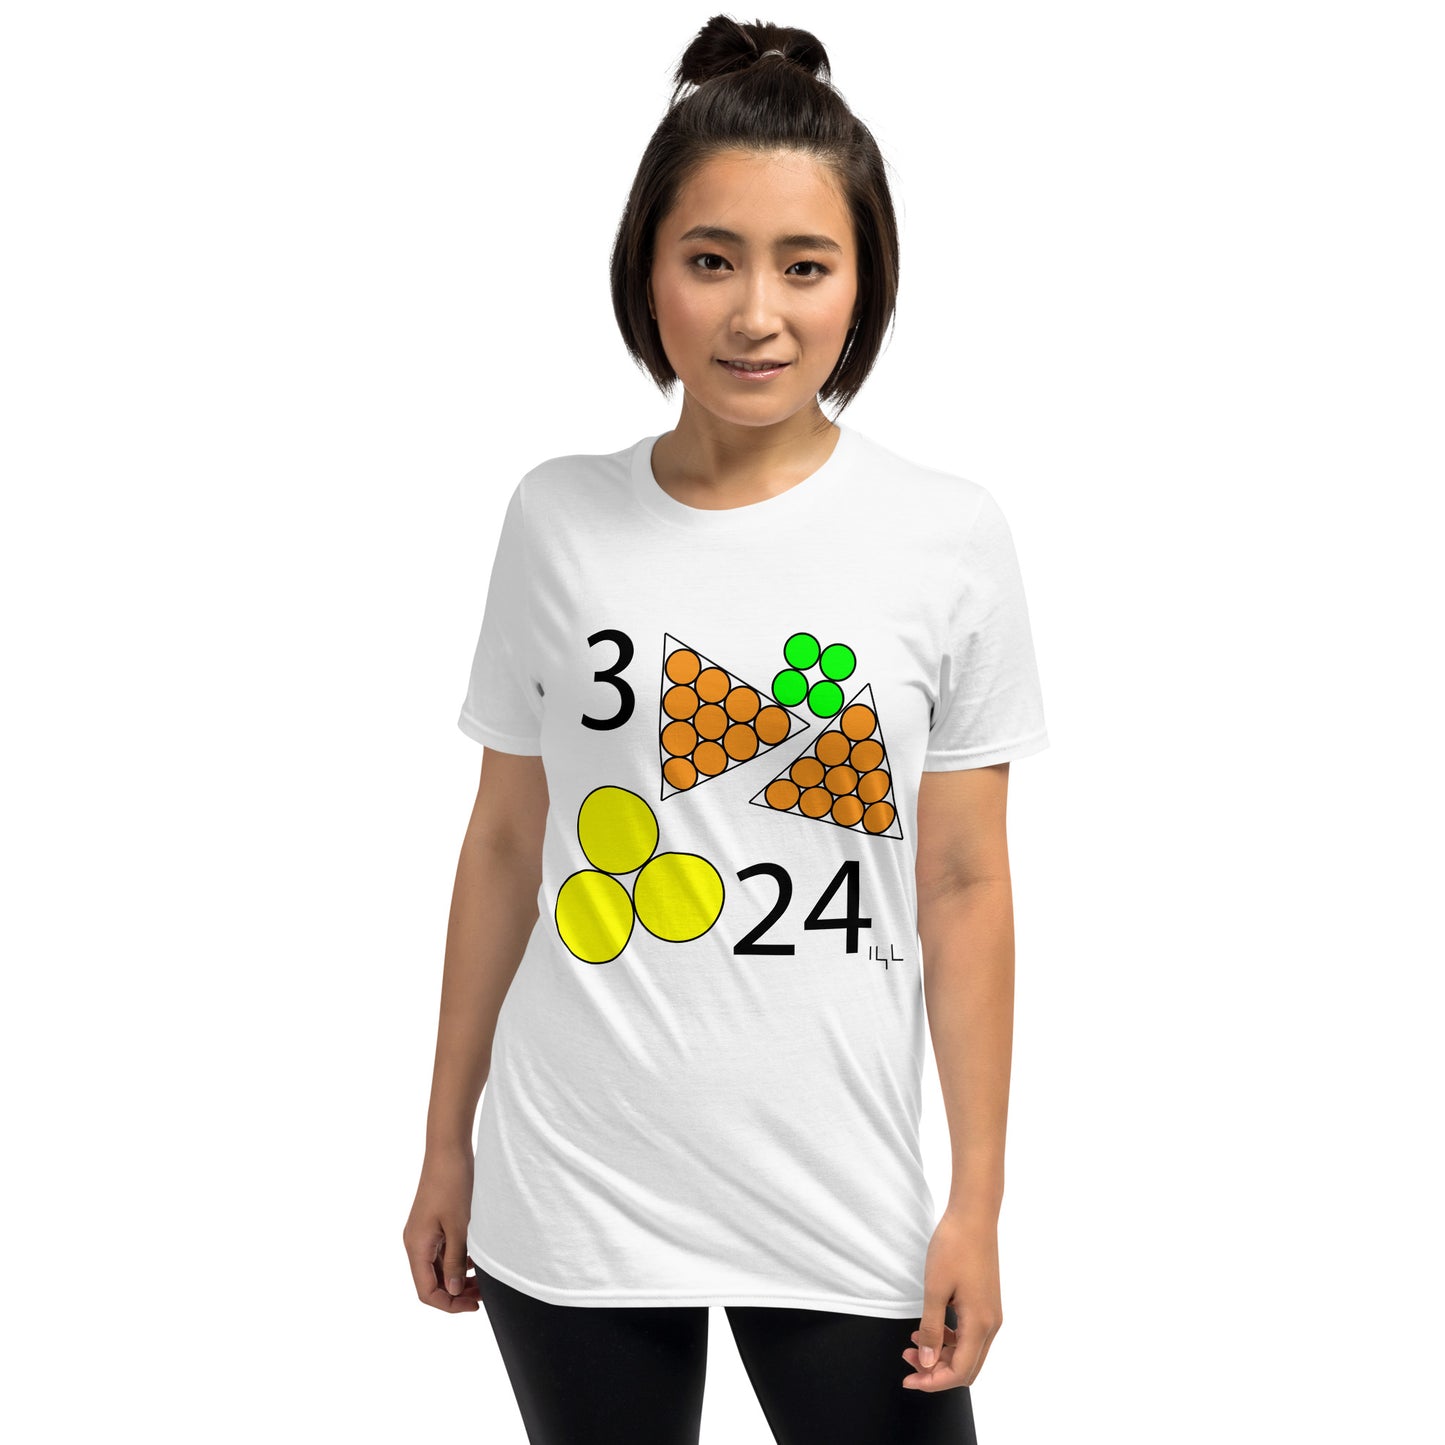 March 24th Yellow T-Shirt at 3:24 0324 324